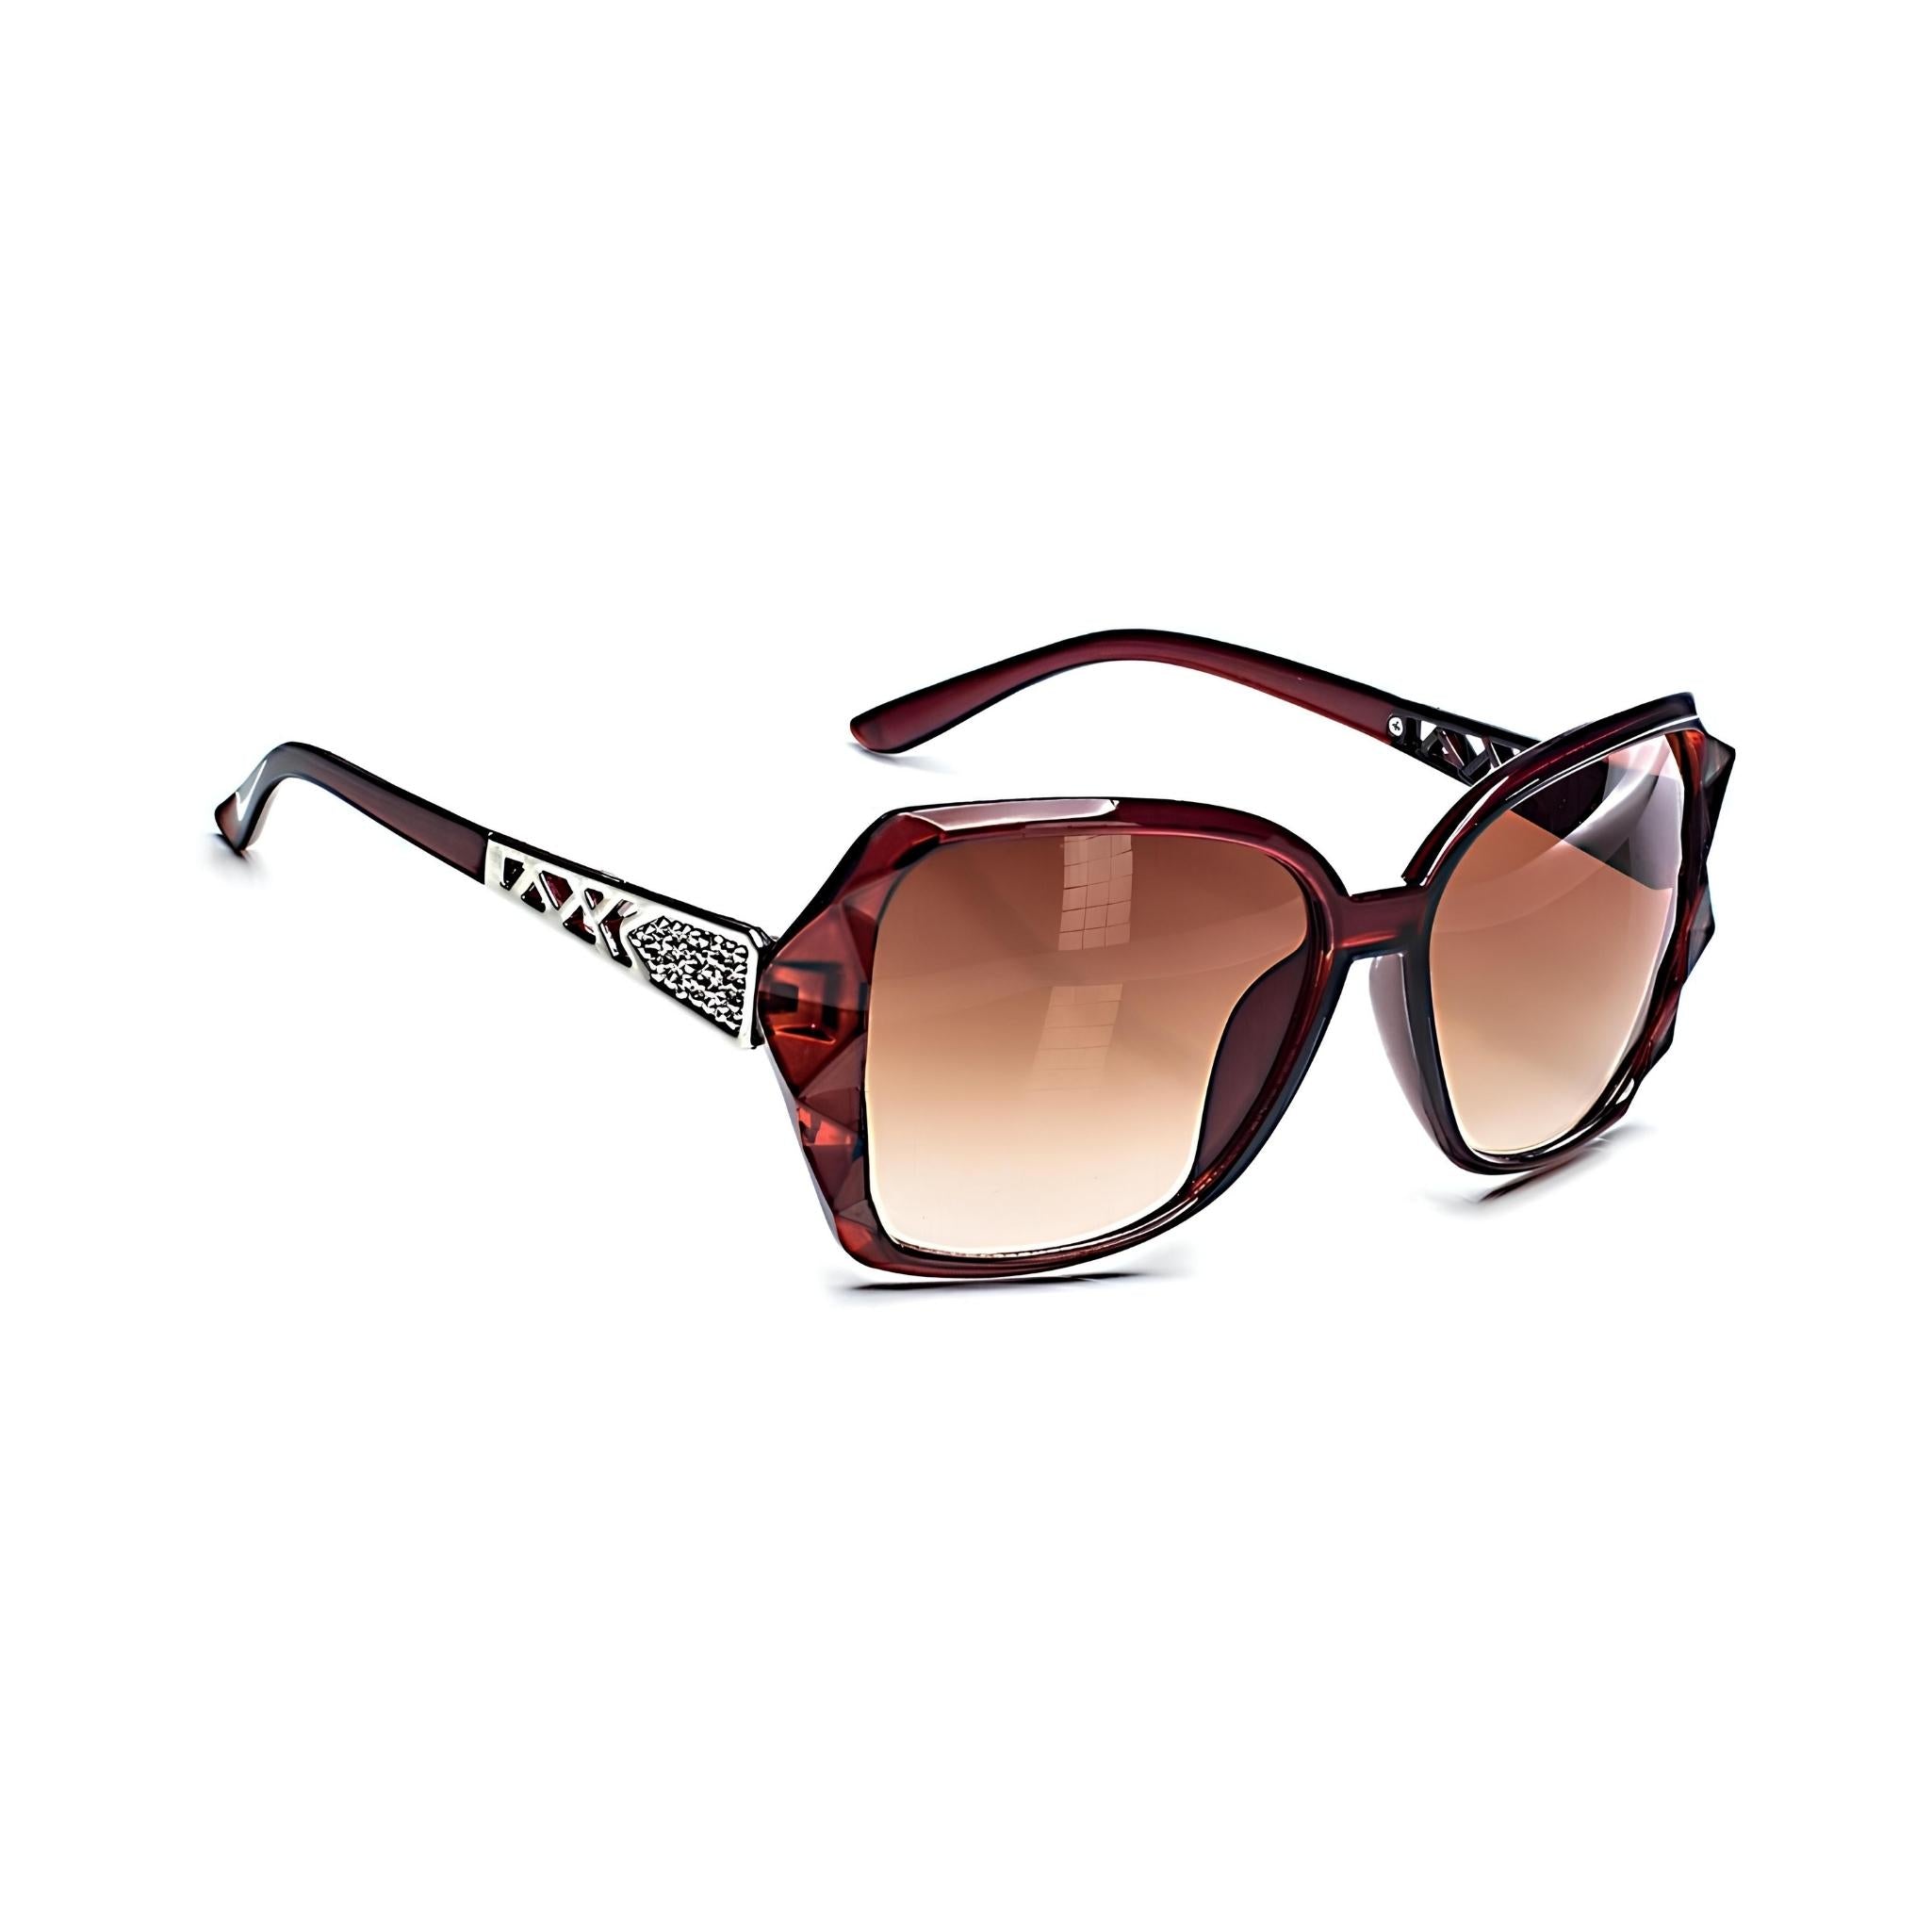 Royal Series Oval Oversized Sunglasses For Women - Brown